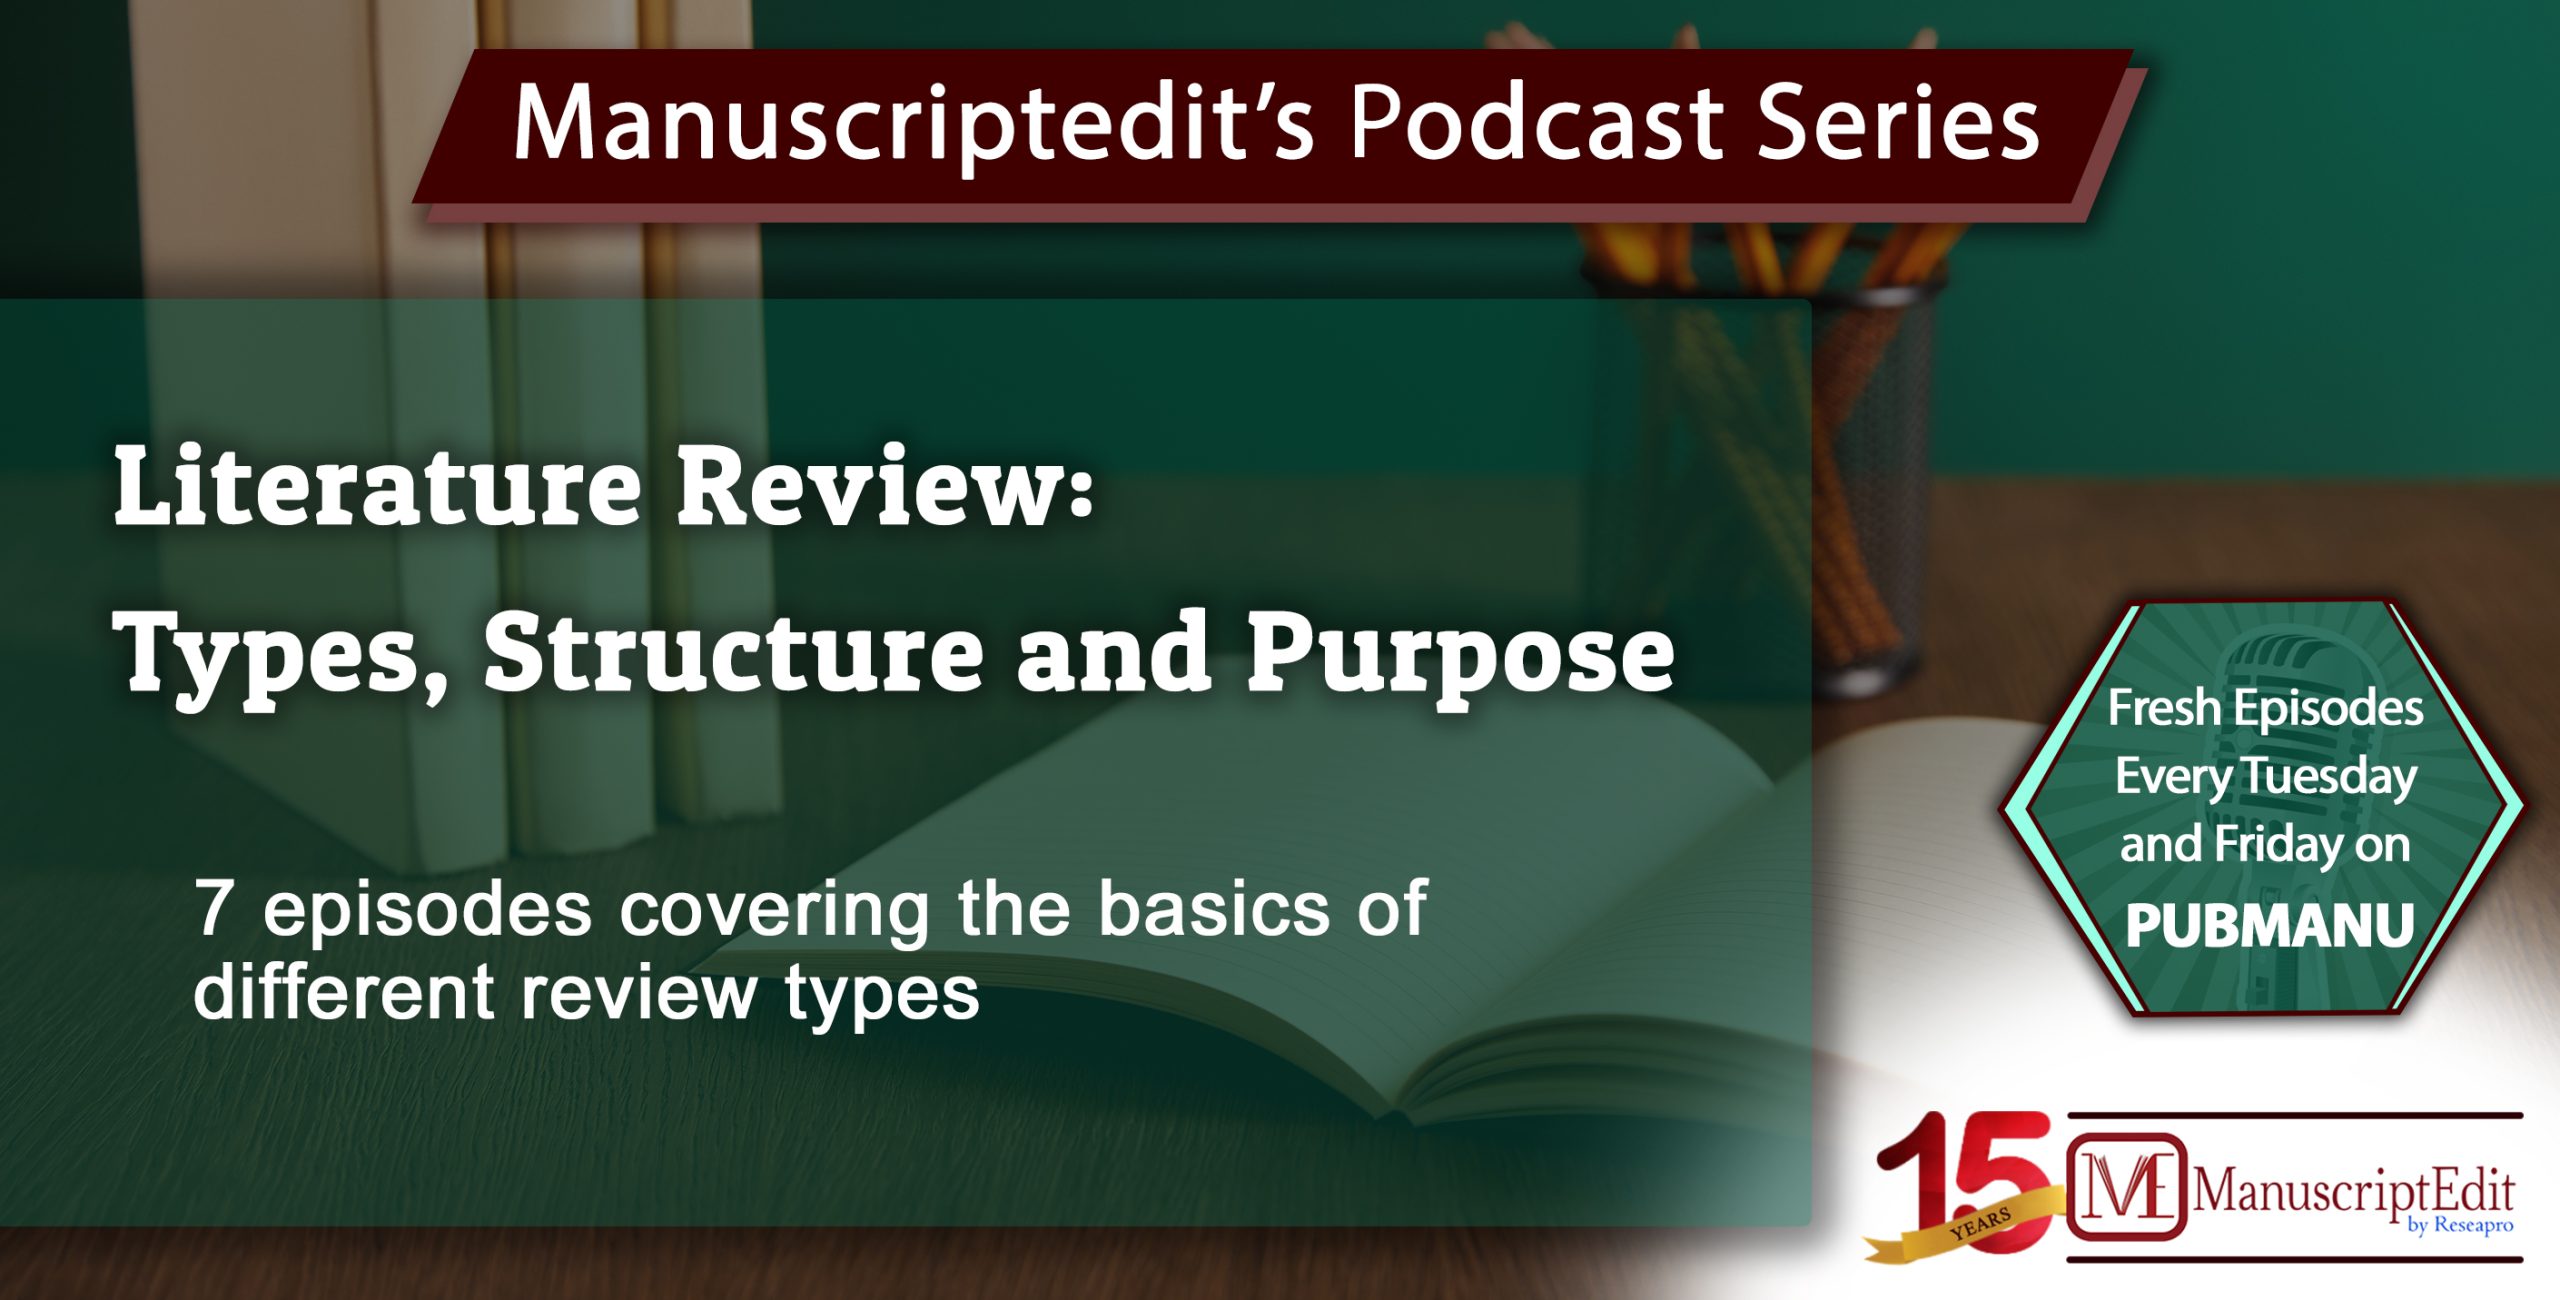 Episode 1-Literature Review and its purpose